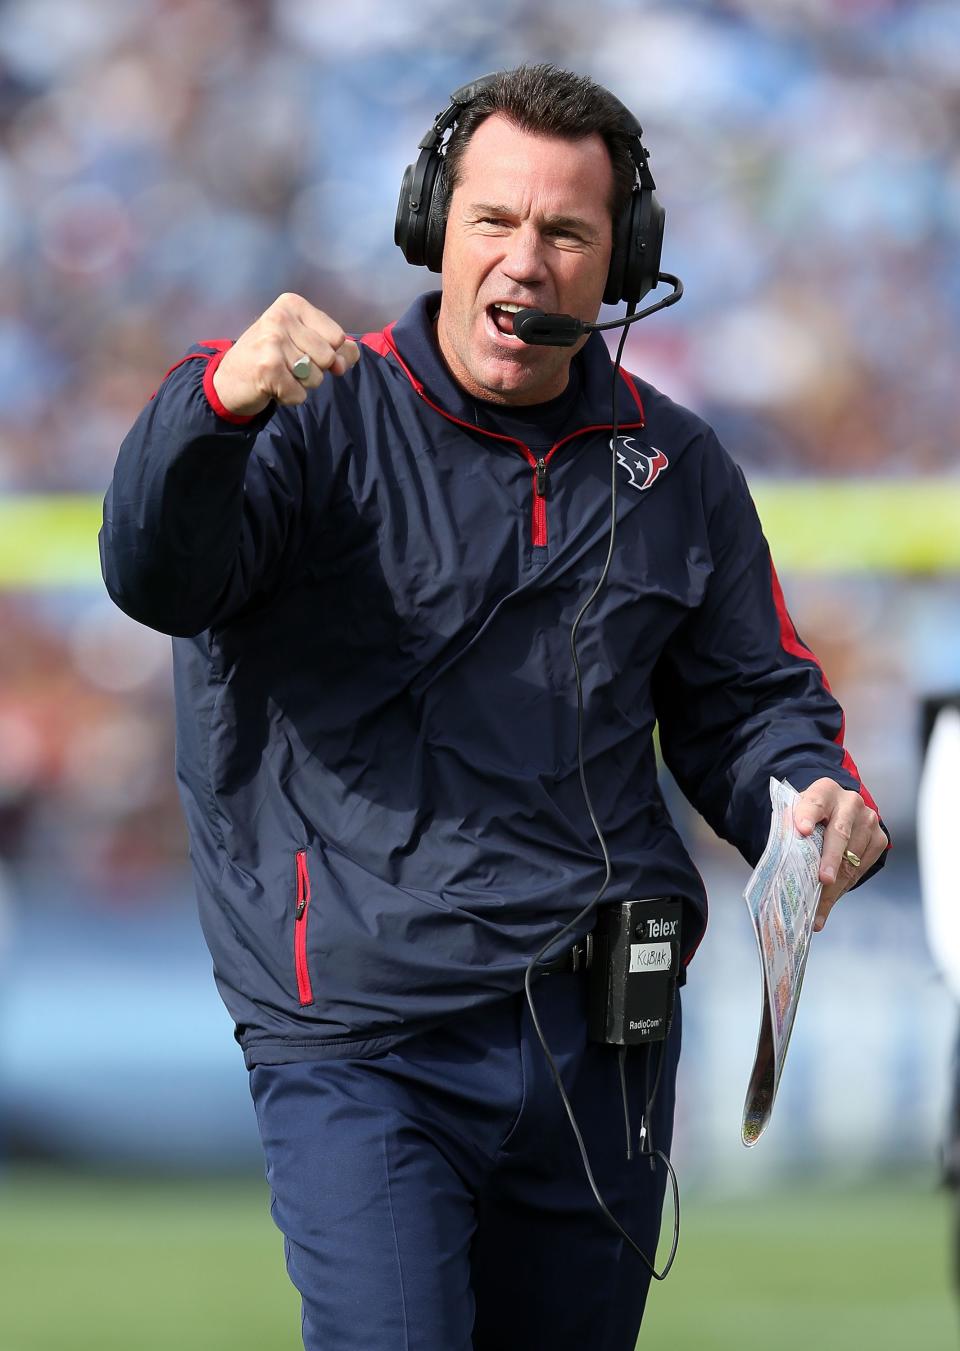 Gary Kubiak the head coach of the Houston Texans celebrates after the Texans scored a touchdown during the NFL game against the Tennessee Titans at LP Field on December 2, 2012 in Nashville, Tennessee. (Photo by Andy Lyons/Getty Images)